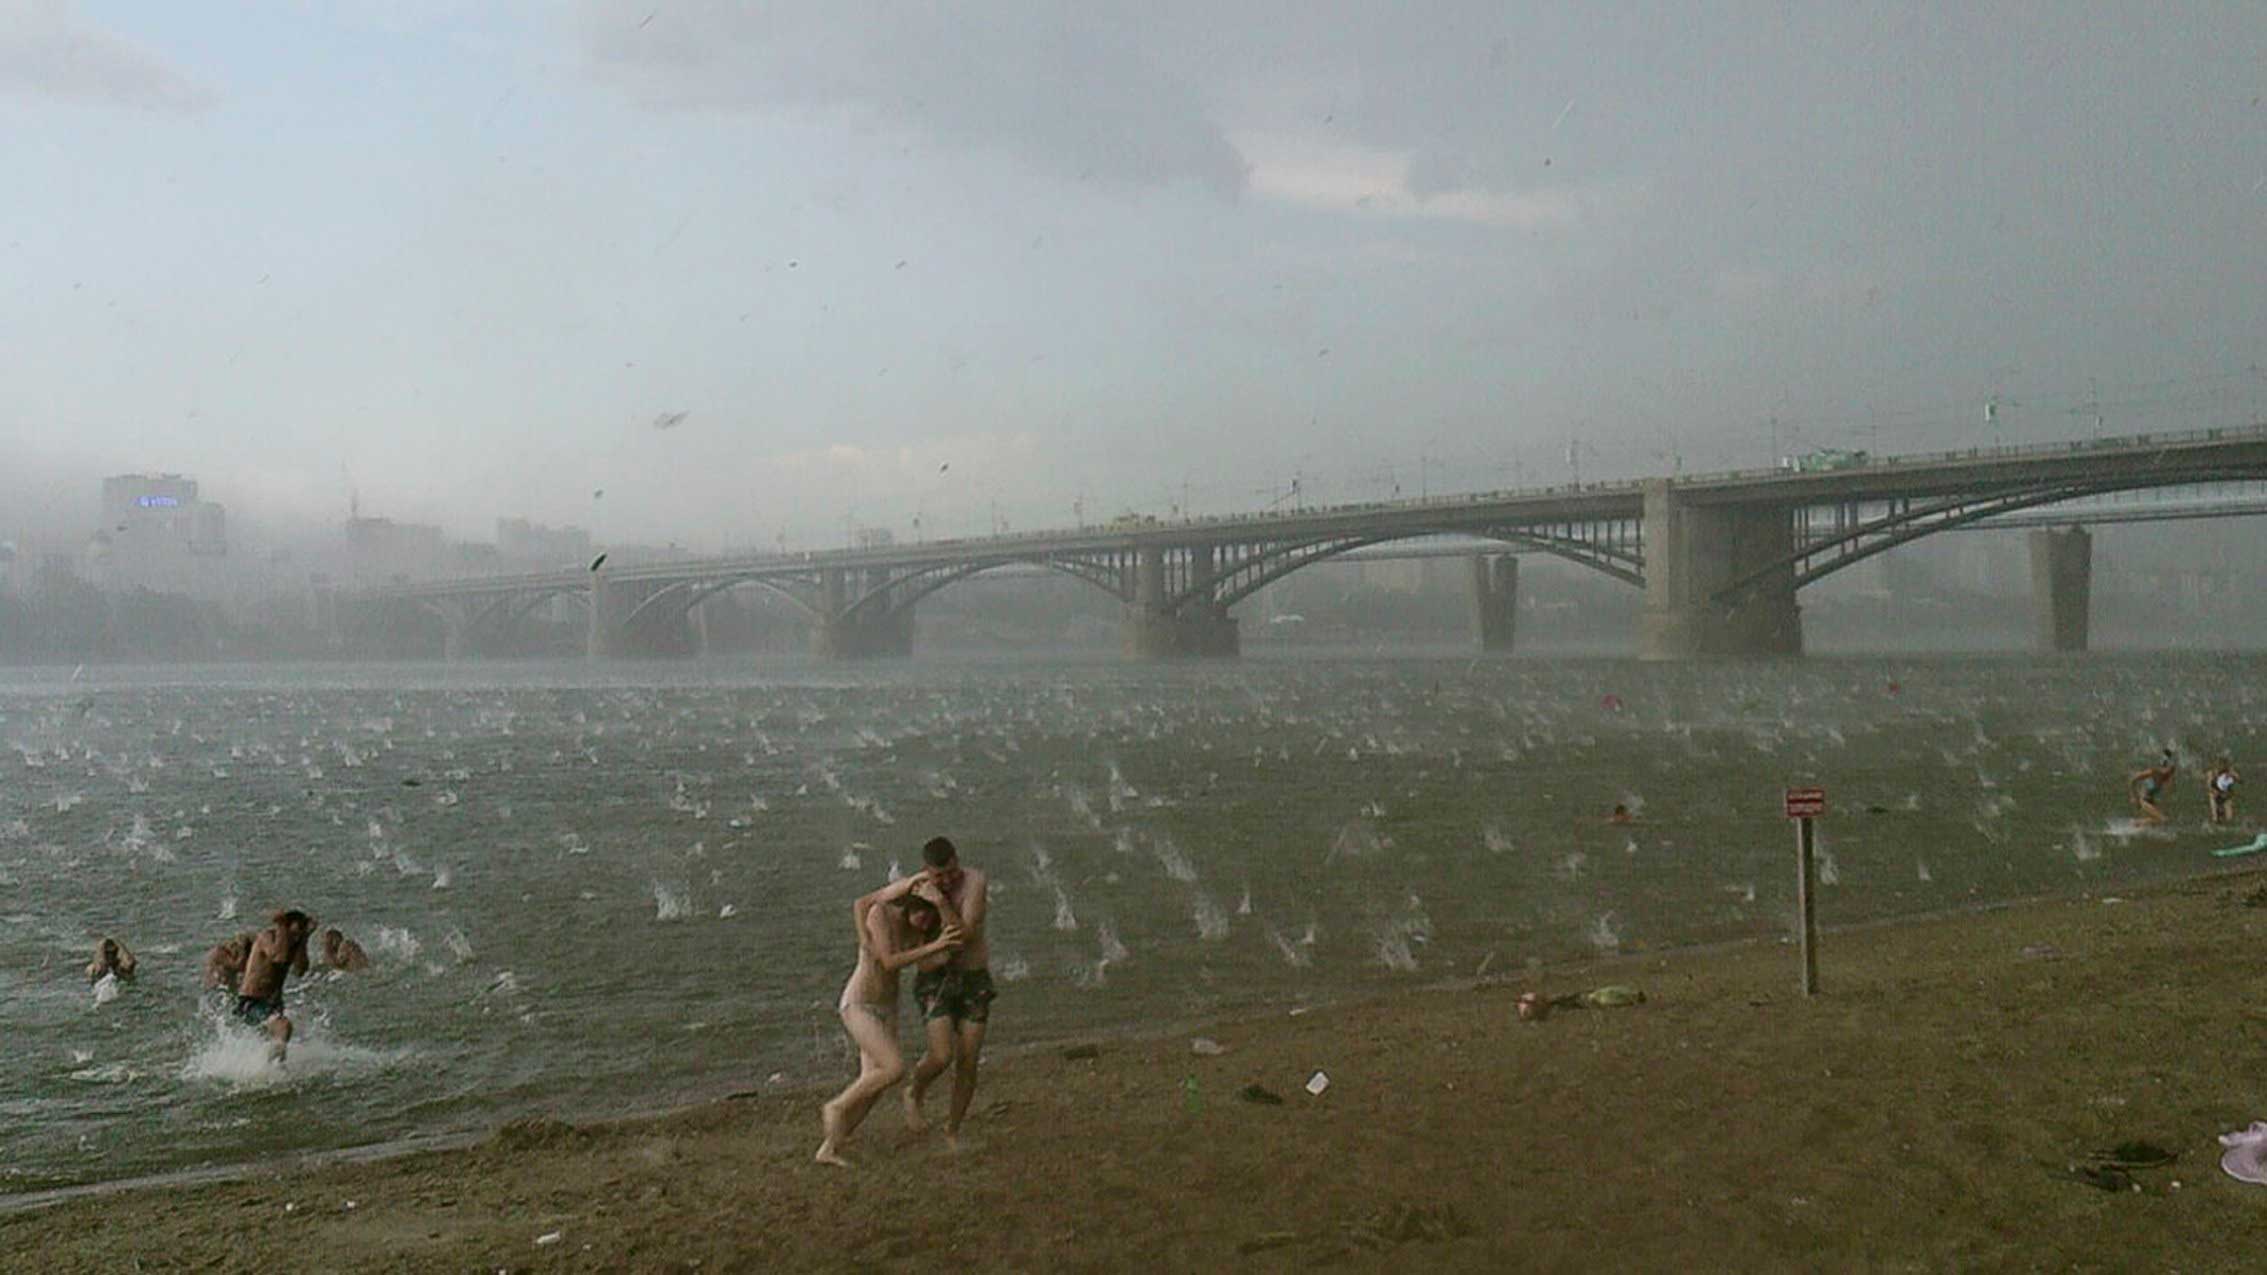 People run to shelter from hailstorm on the beach at Ob River, Novosibirsk, Russia, July 12, 2014.